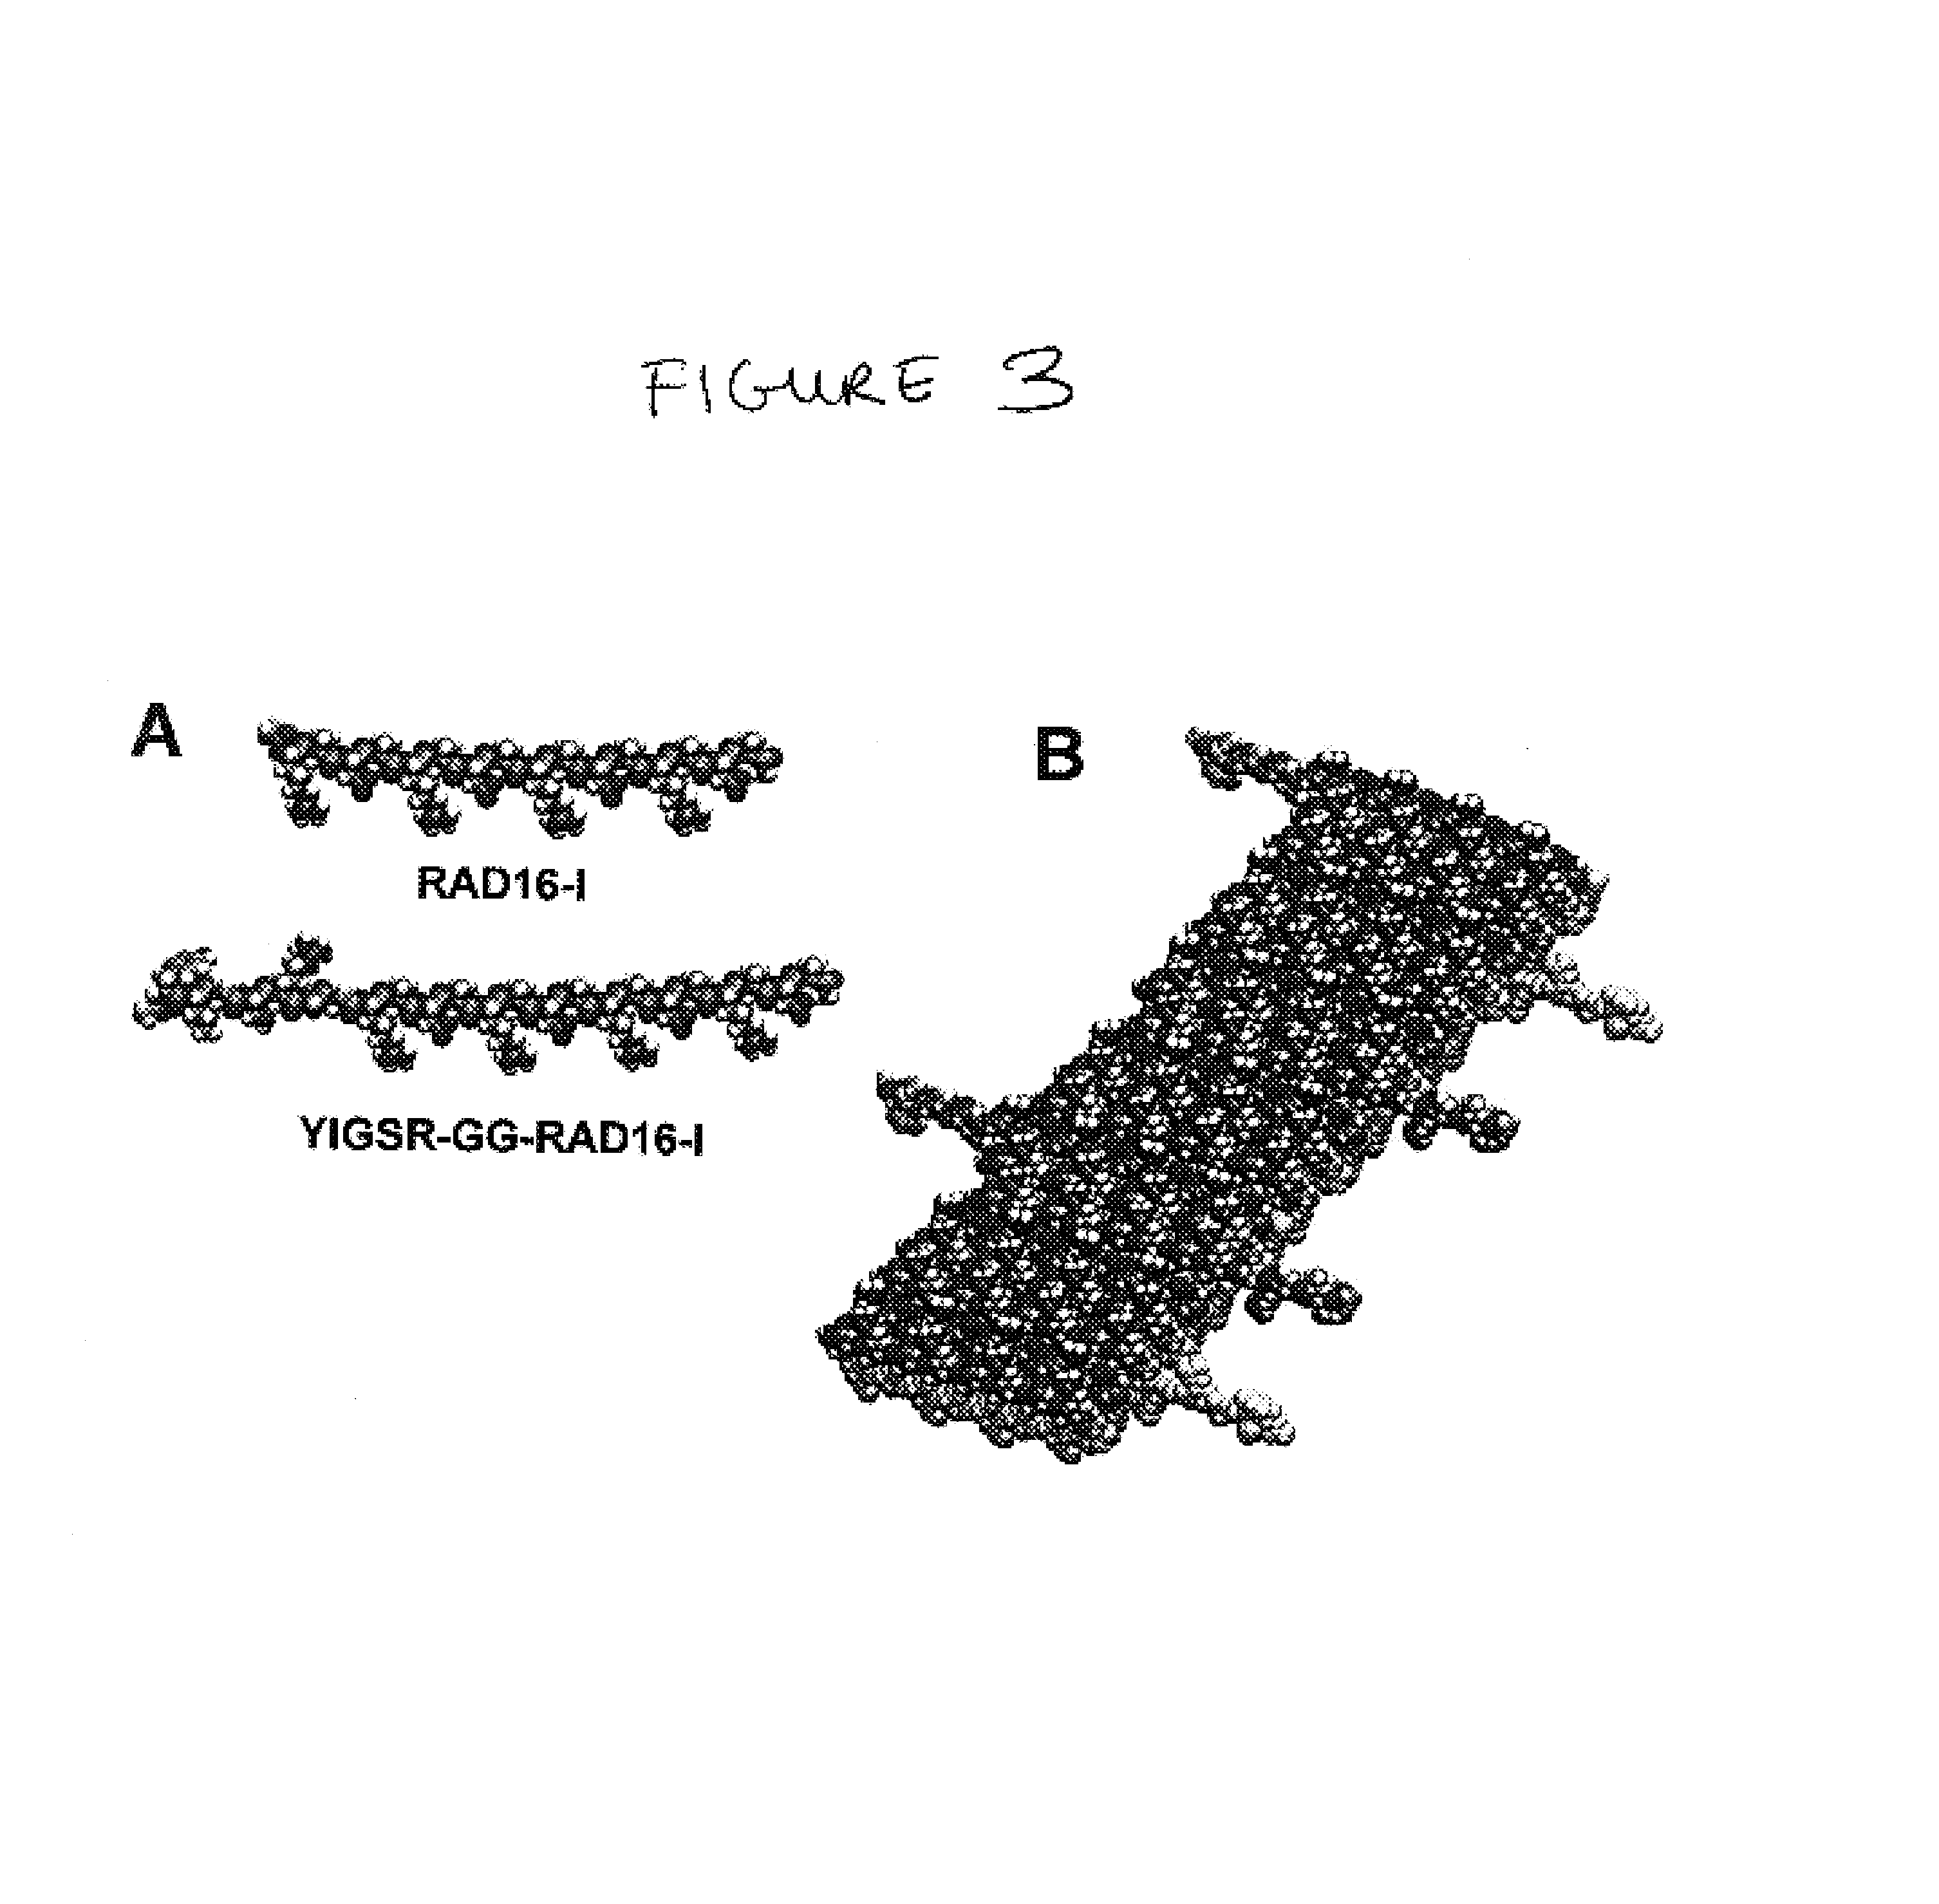 Self-assembling peptides incorporating modifications and methods of use thereof